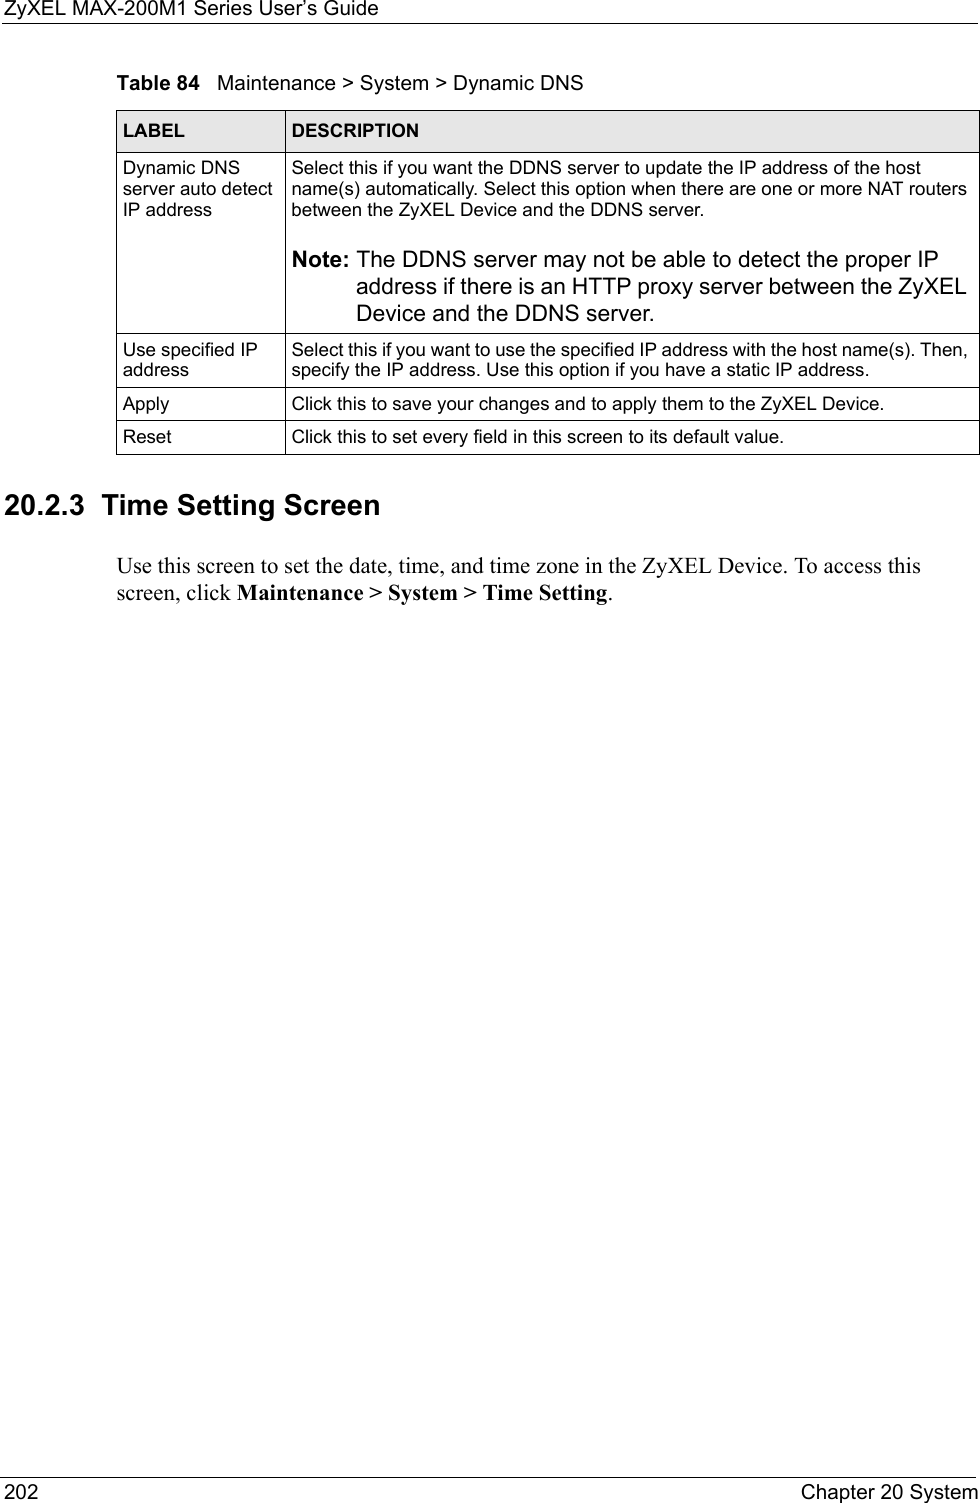 ZyXEL MAX-200M1 Series User’s Guide202 Chapter 20 System20.2.3  Time Setting ScreenUse this screen to set the date, time, and time zone in the ZyXEL Device. To access this screen, click Maintenance &gt; System &gt; Time Setting.Dynamic DNS server auto detect IP addressSelect this if you want the DDNS server to update the IP address of the host name(s) automatically. Select this option when there are one or more NAT routers between the ZyXEL Device and the DDNS server.Note: The DDNS server may not be able to detect the proper IP address if there is an HTTP proxy server between the ZyXEL Device and the DDNS server.Use specified IP addressSelect this if you want to use the specified IP address with the host name(s). Then, specify the IP address. Use this option if you have a static IP address.Apply Click this to save your changes and to apply them to the ZyXEL Device.Reset Click this to set every field in this screen to its default value.Table 84   Maintenance &gt; System &gt; Dynamic DNSLABEL DESCRIPTION